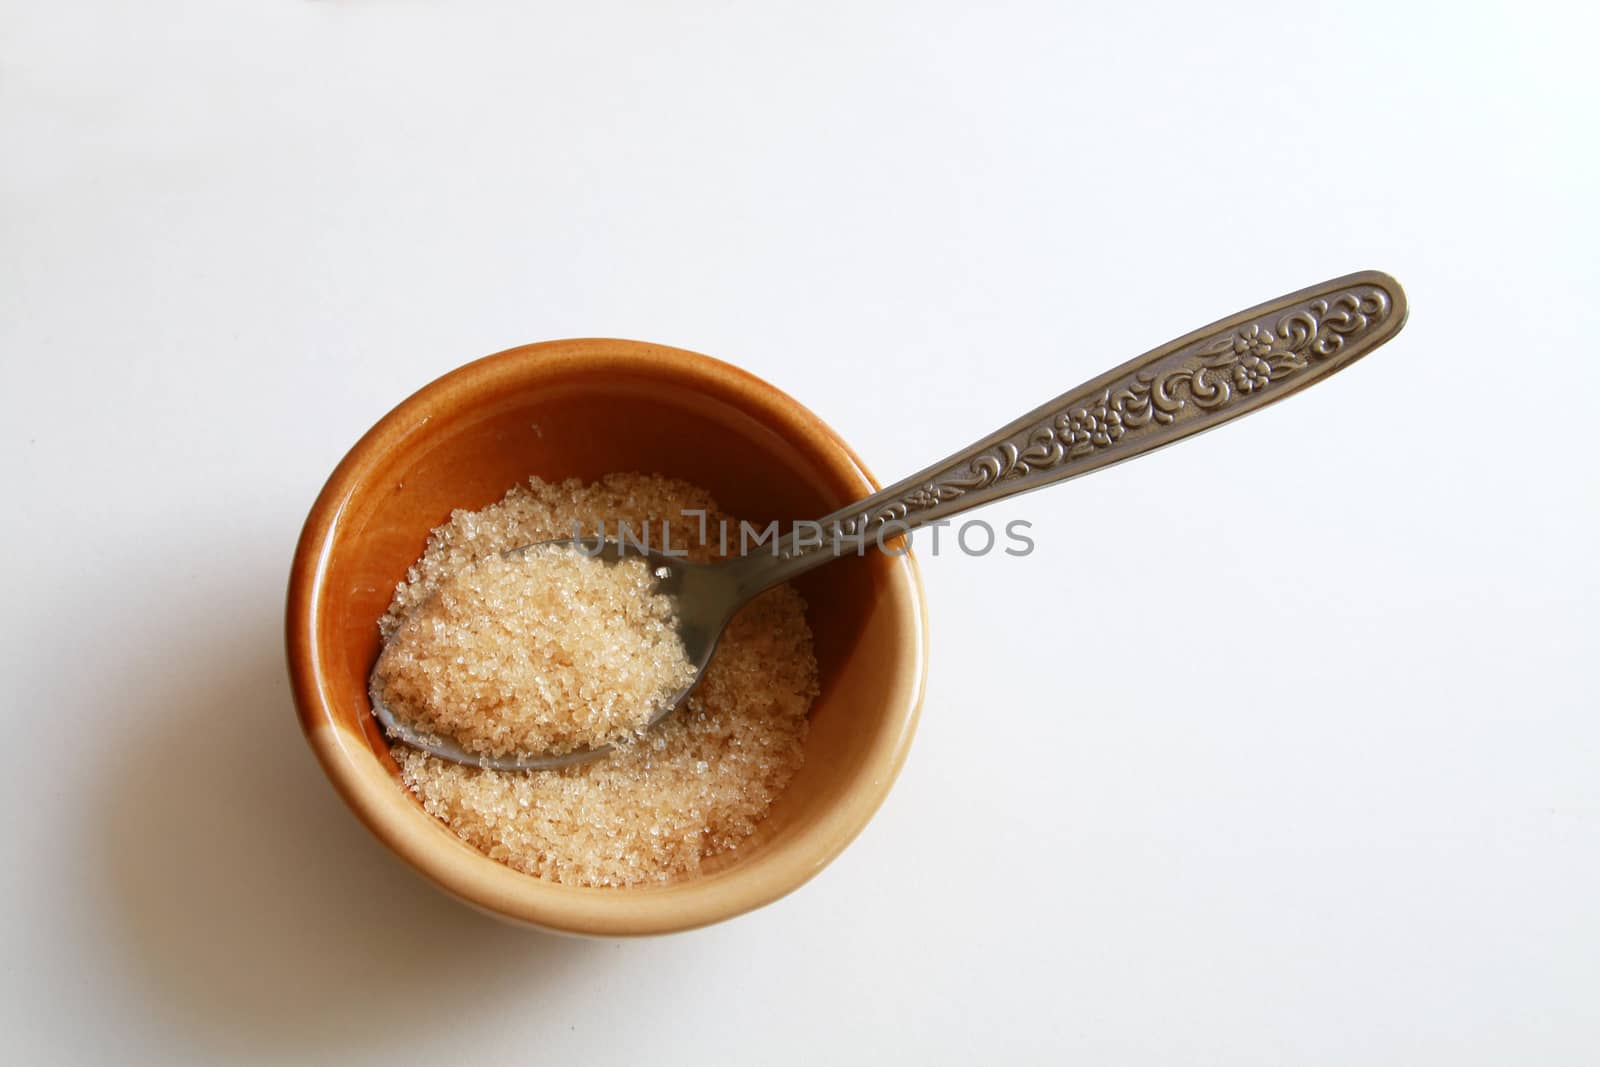 Brown sugar in the bowl and tea spoon.